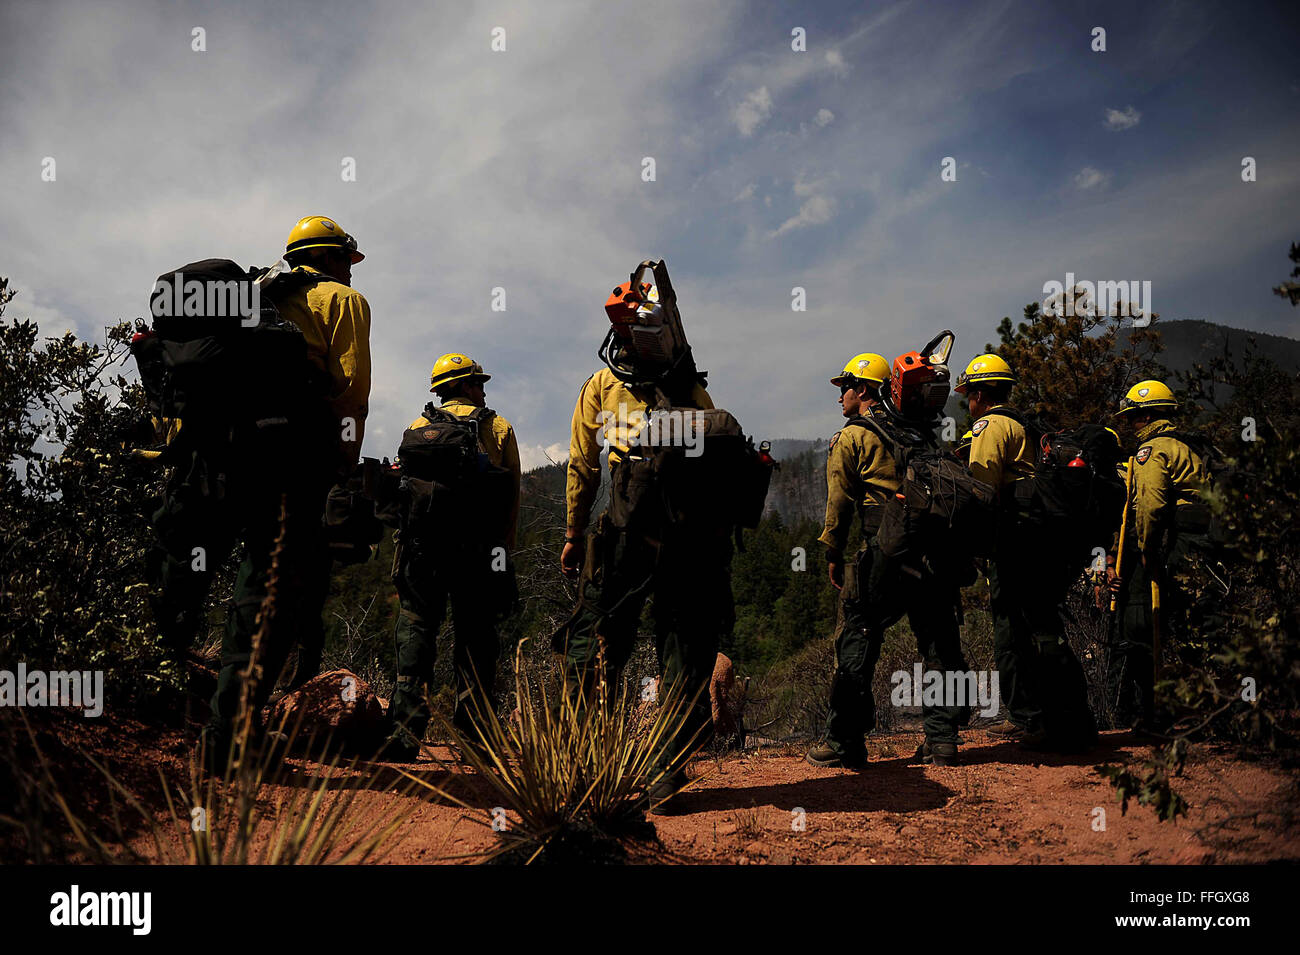 Vandenberg Air Force Base Hot Shot fire fighters prepare to cut a fire line on June 28, 2012 in the Mount Saint Francois area of Colorado Springs, Co. while helping to battle several fires in Waldo Canyon.  The Waldo Canyon fire has grown to 18,500 acres and burned over 300 homes. Currently, more than 90 firefighters from the Academy, along with assets from Air Force Space Command; F.E. Warren Air Force Base, Wyo.; Fort Carson, Colo.; and the local community continue to fight the Waldo Canyon fire Stock Photo